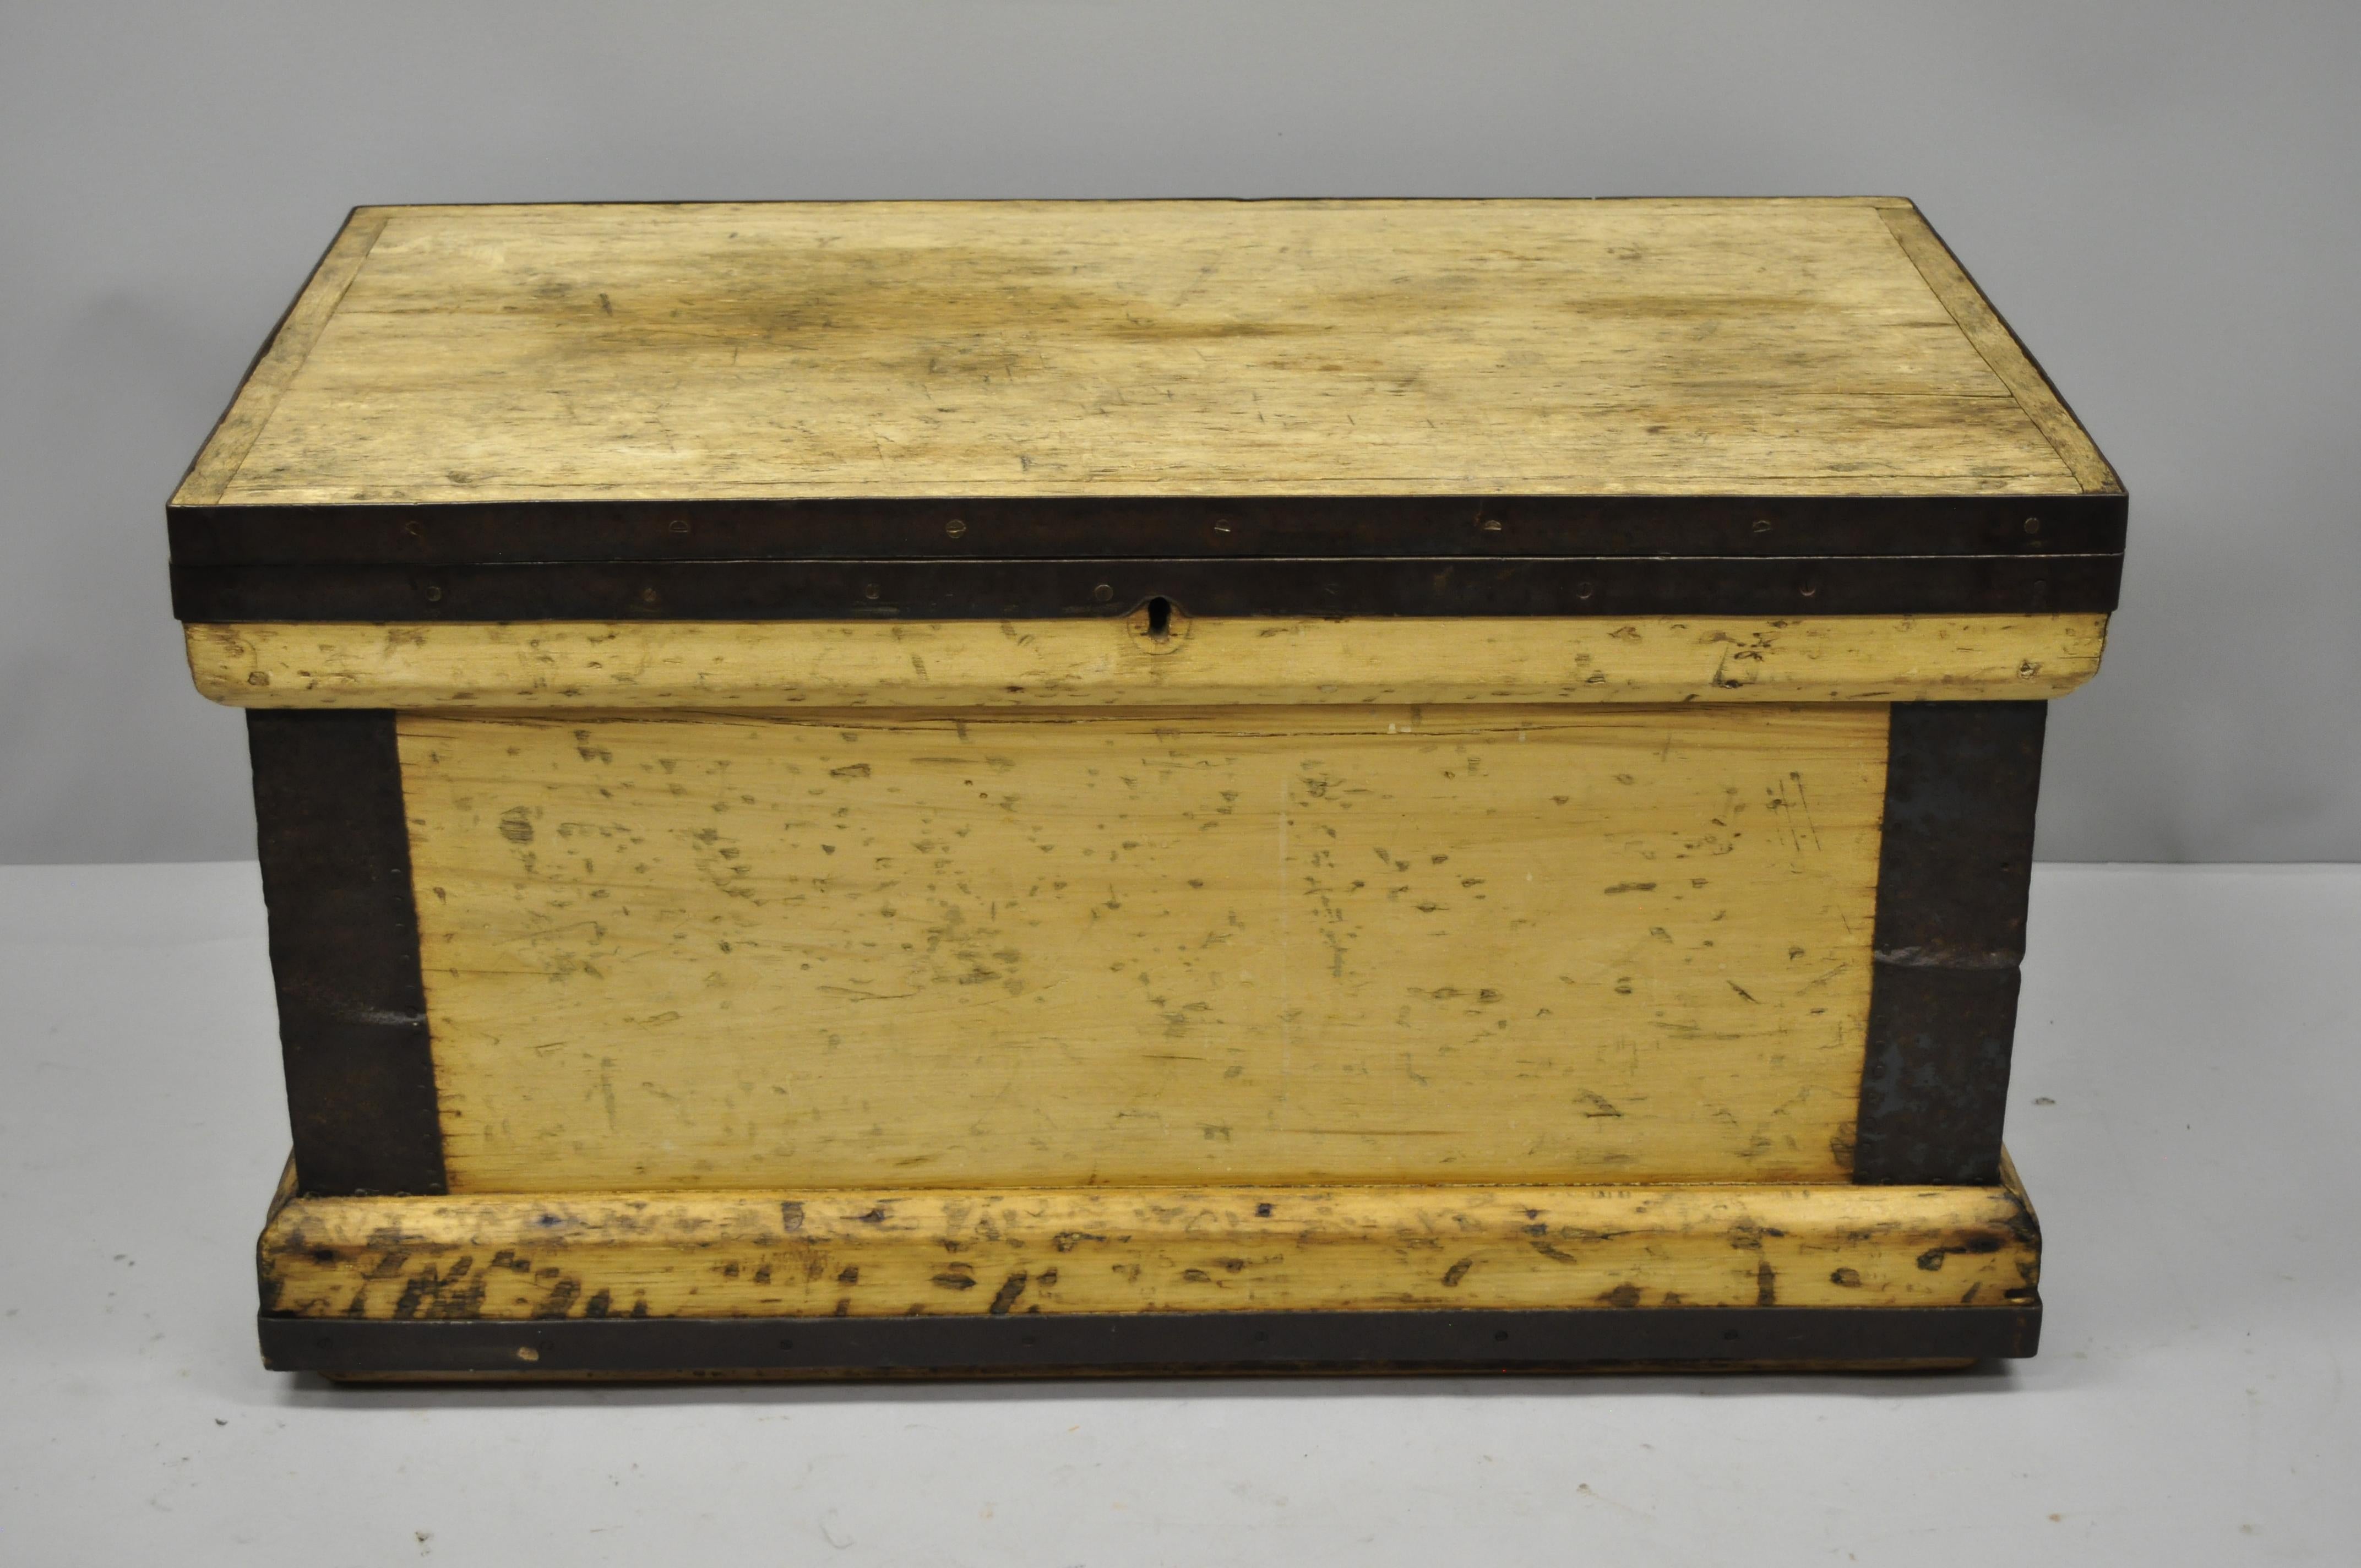 Antique wood and cast iron primitive industrial trunk blanket storage chest. Item features heavy solid wood construction, cast iron trim, side handles, desirable weathered finish, lock removed for safety. Weighs approximate 80 pounds, circa 19th